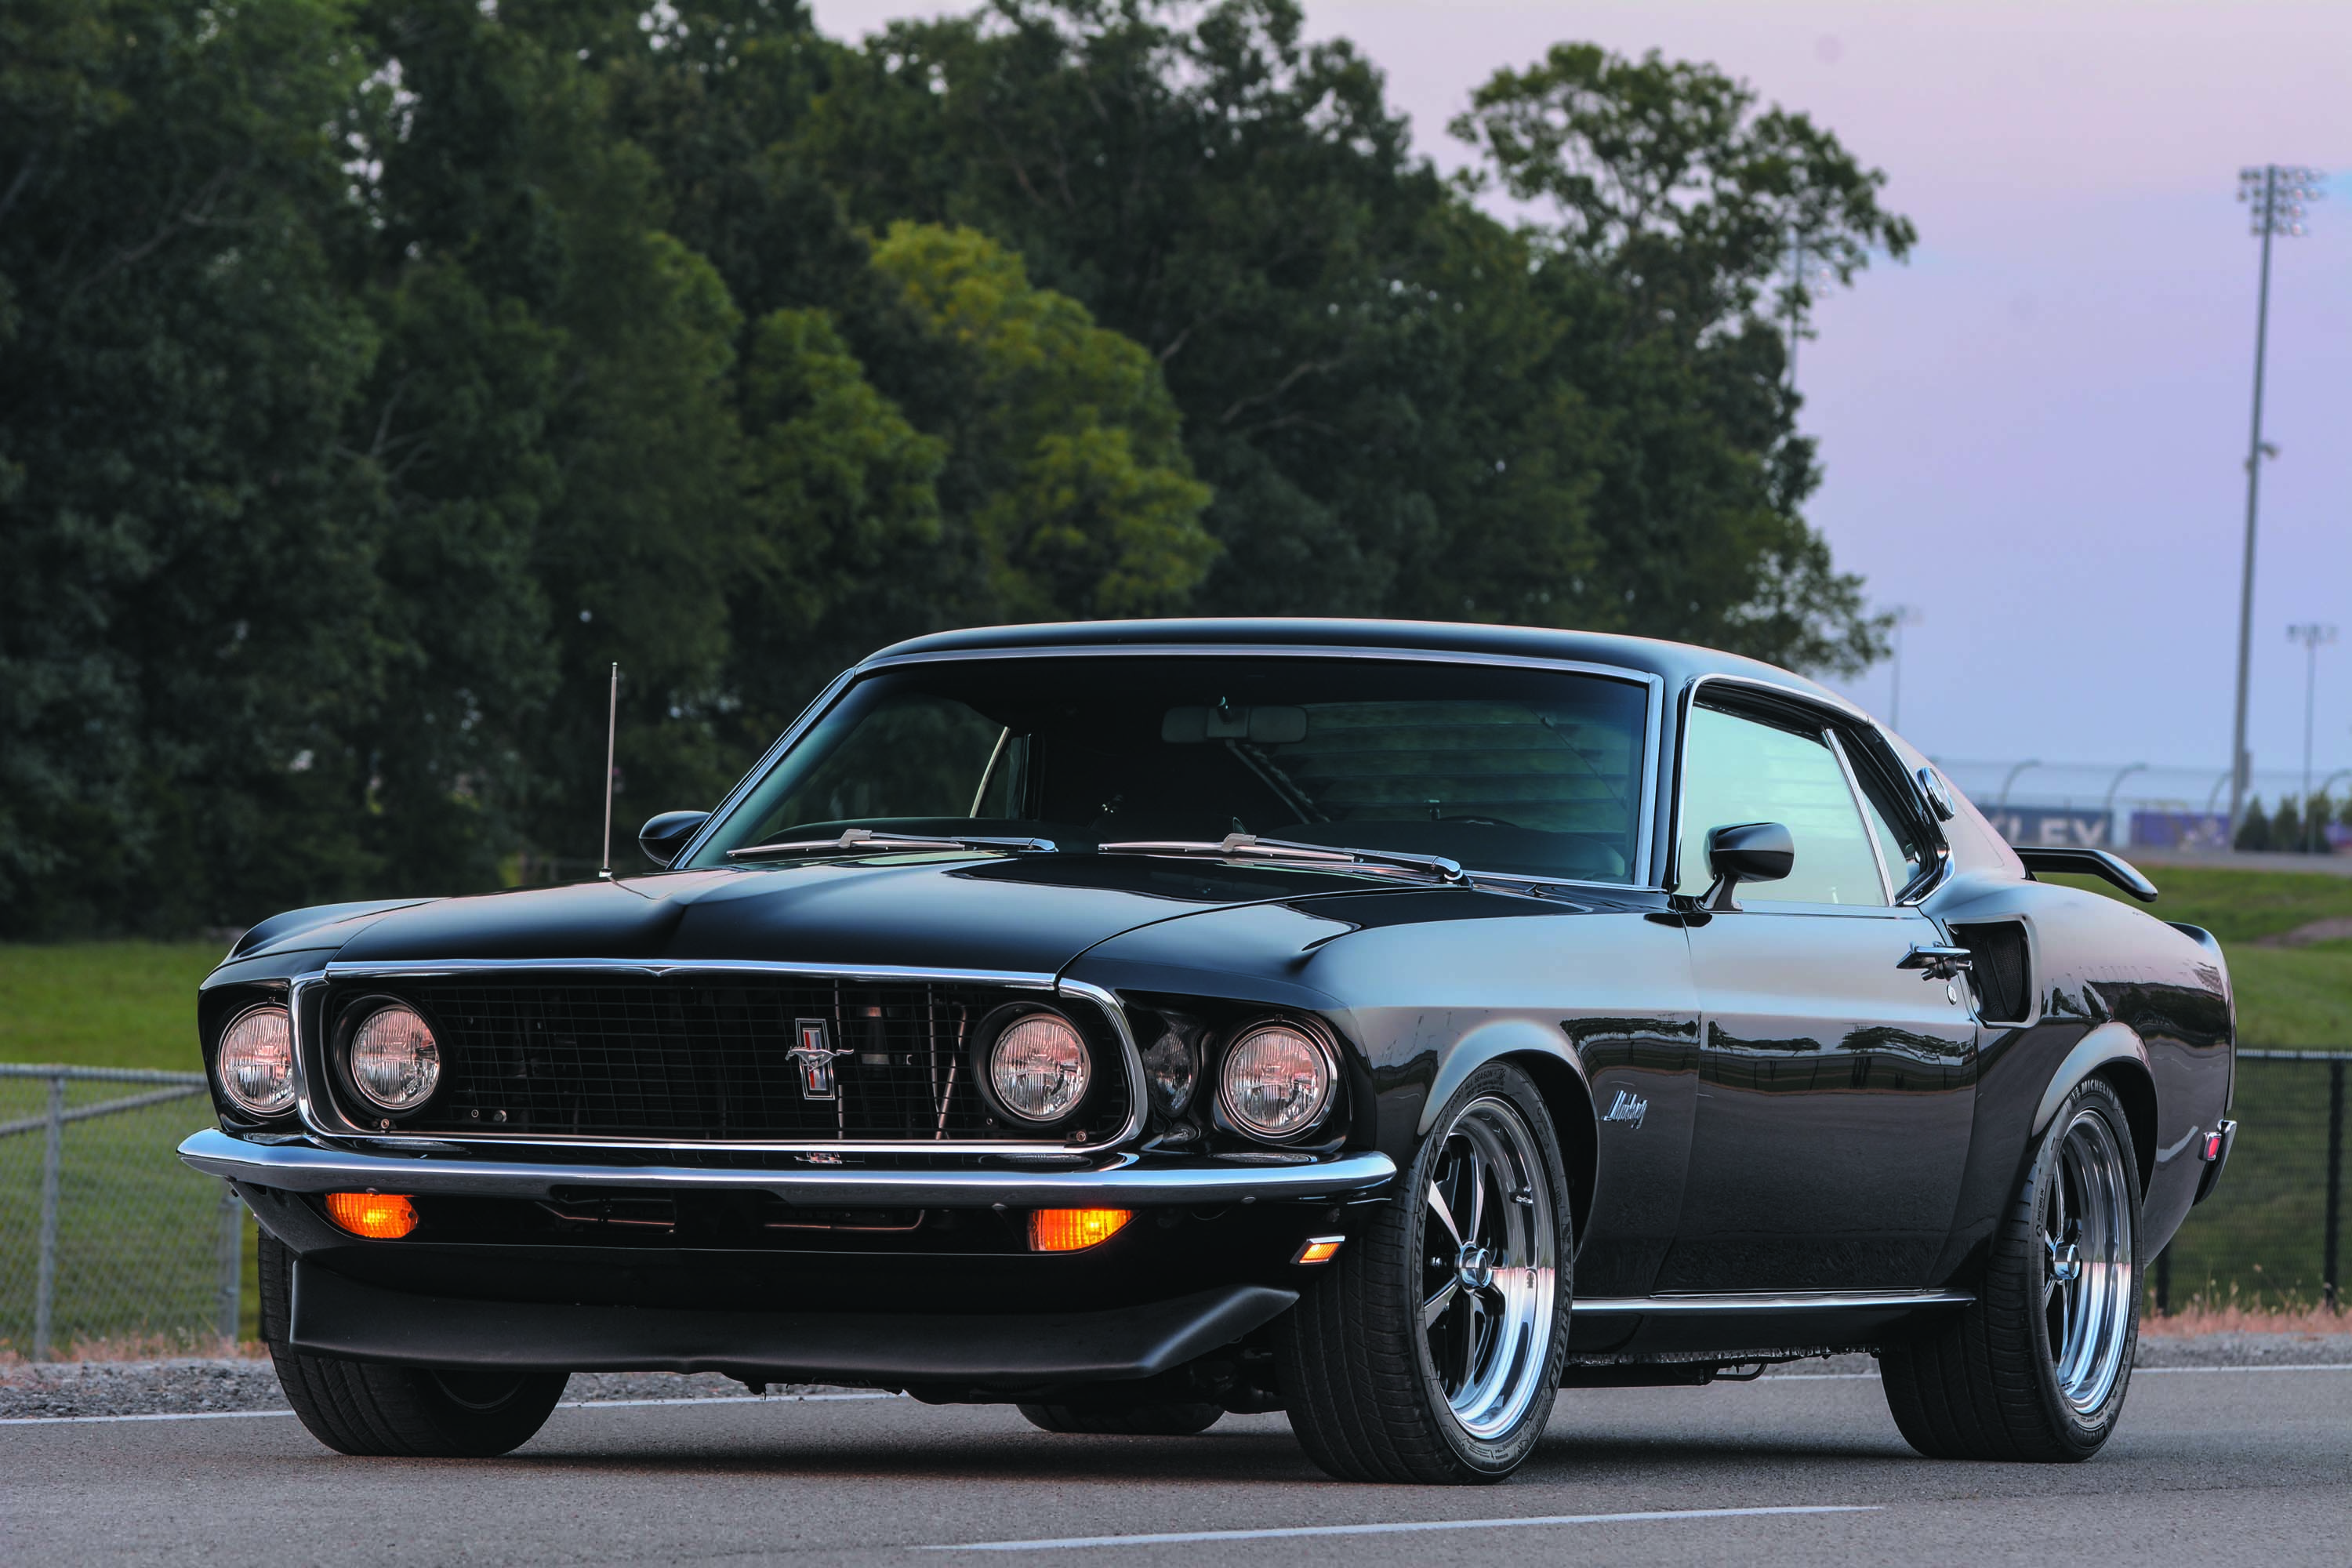 Practical Upgrades Brought This 1969 Mustang SportsRoof into the Modern Era